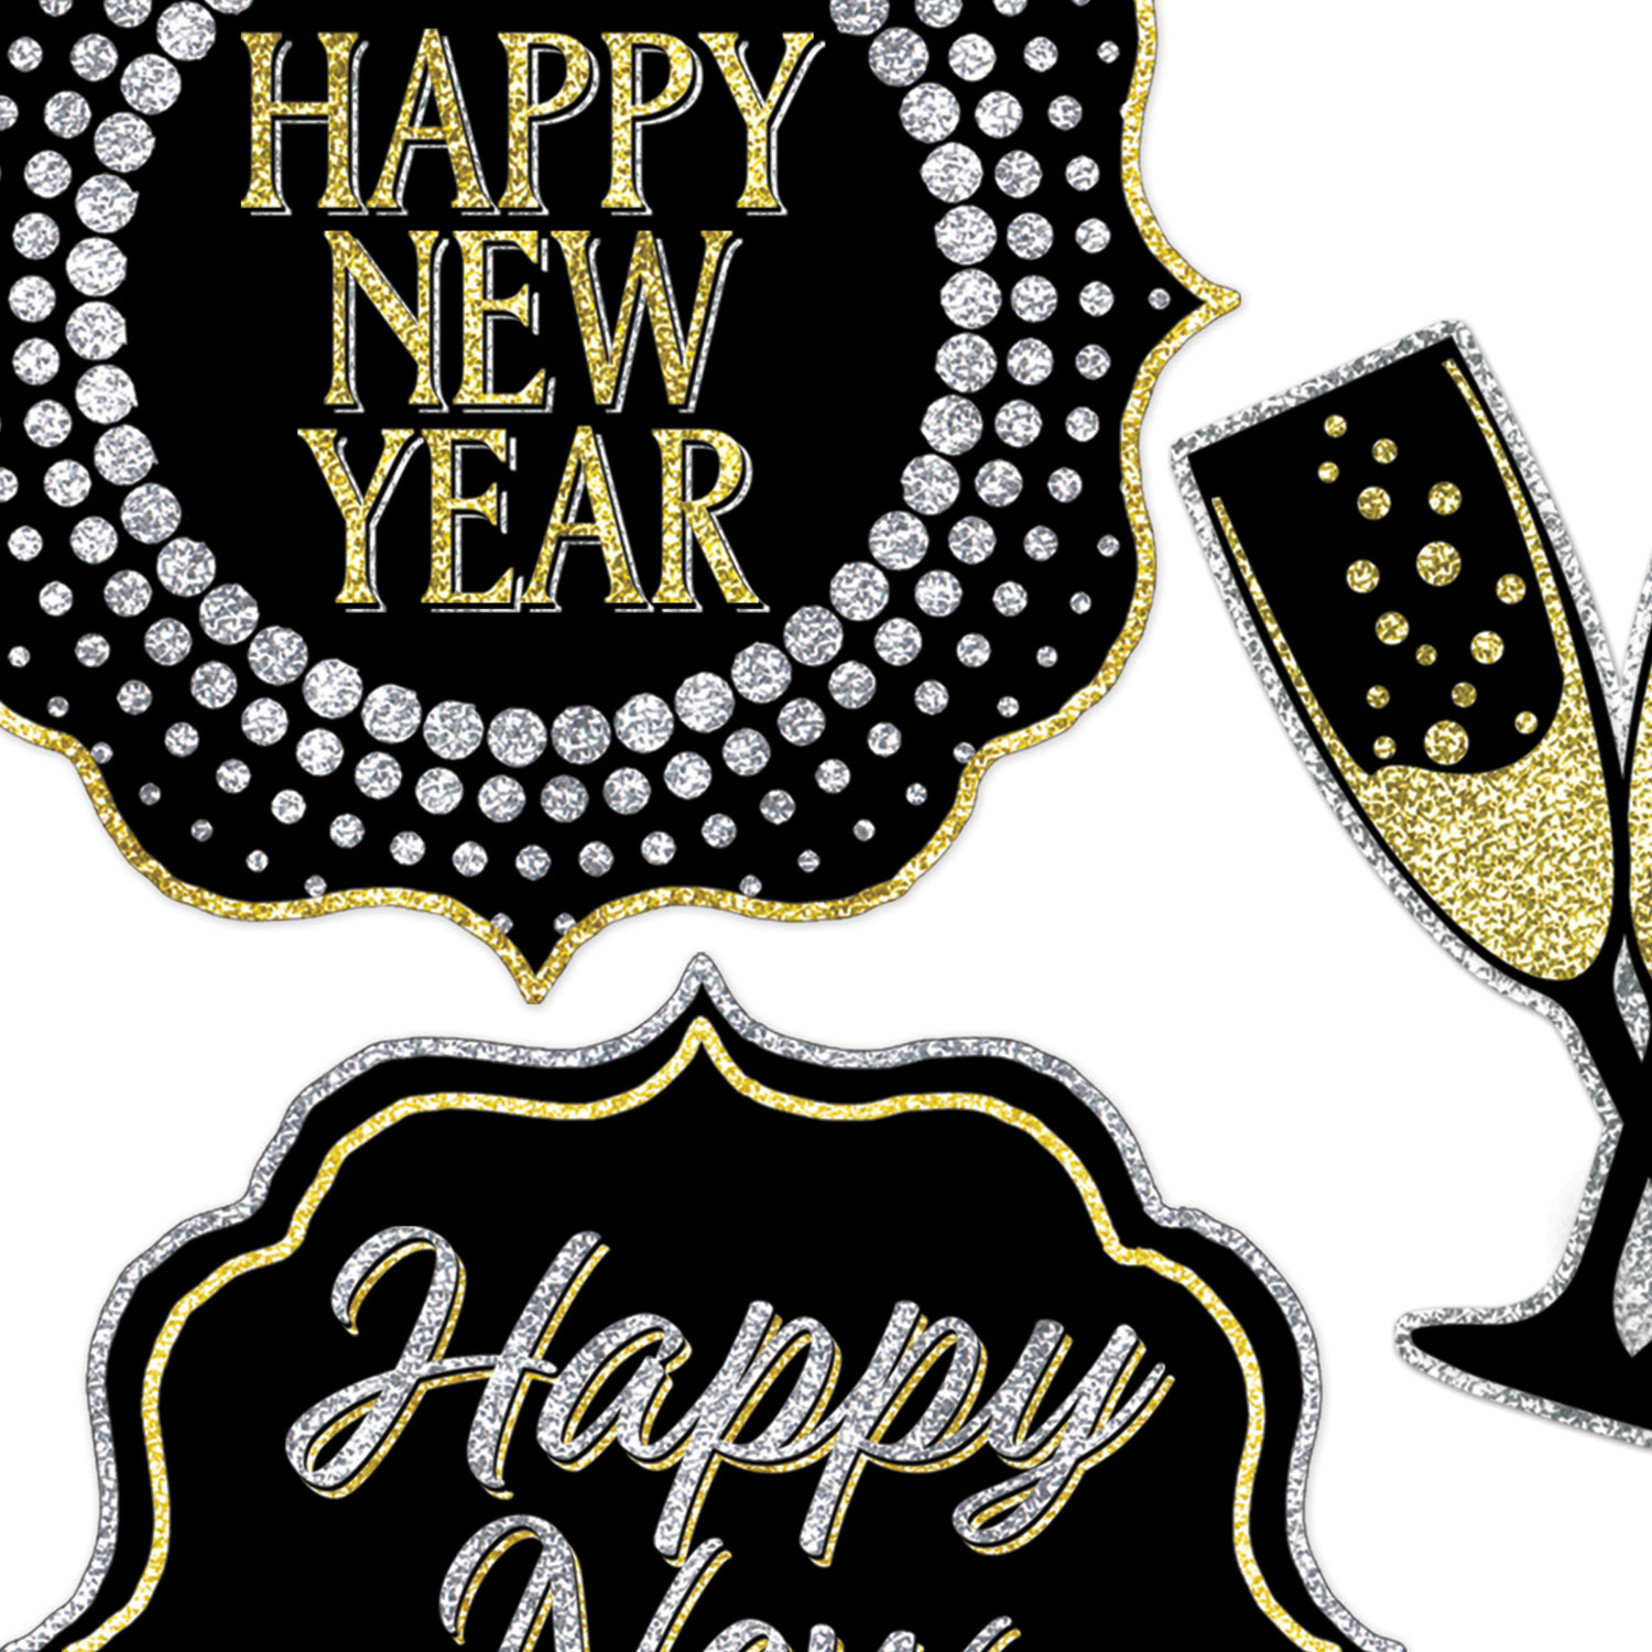 Beistle Happy New Year Cutouts - 6ct.